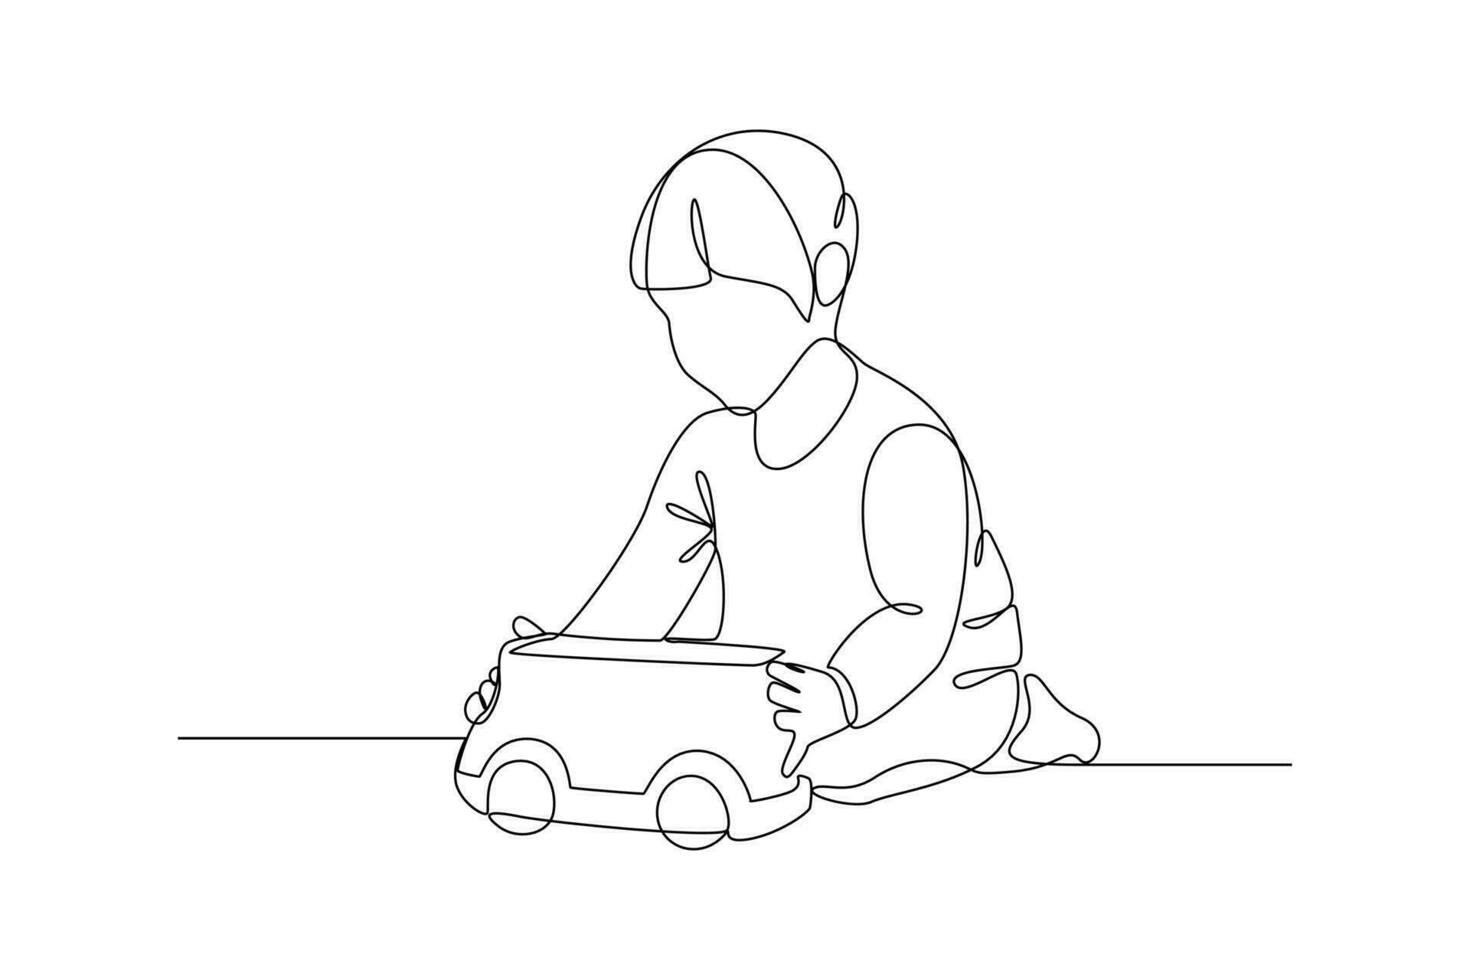 Single one-line drawing happy boy playing toy car. Children playing with toys concept. Continuous line drawing illustration vector